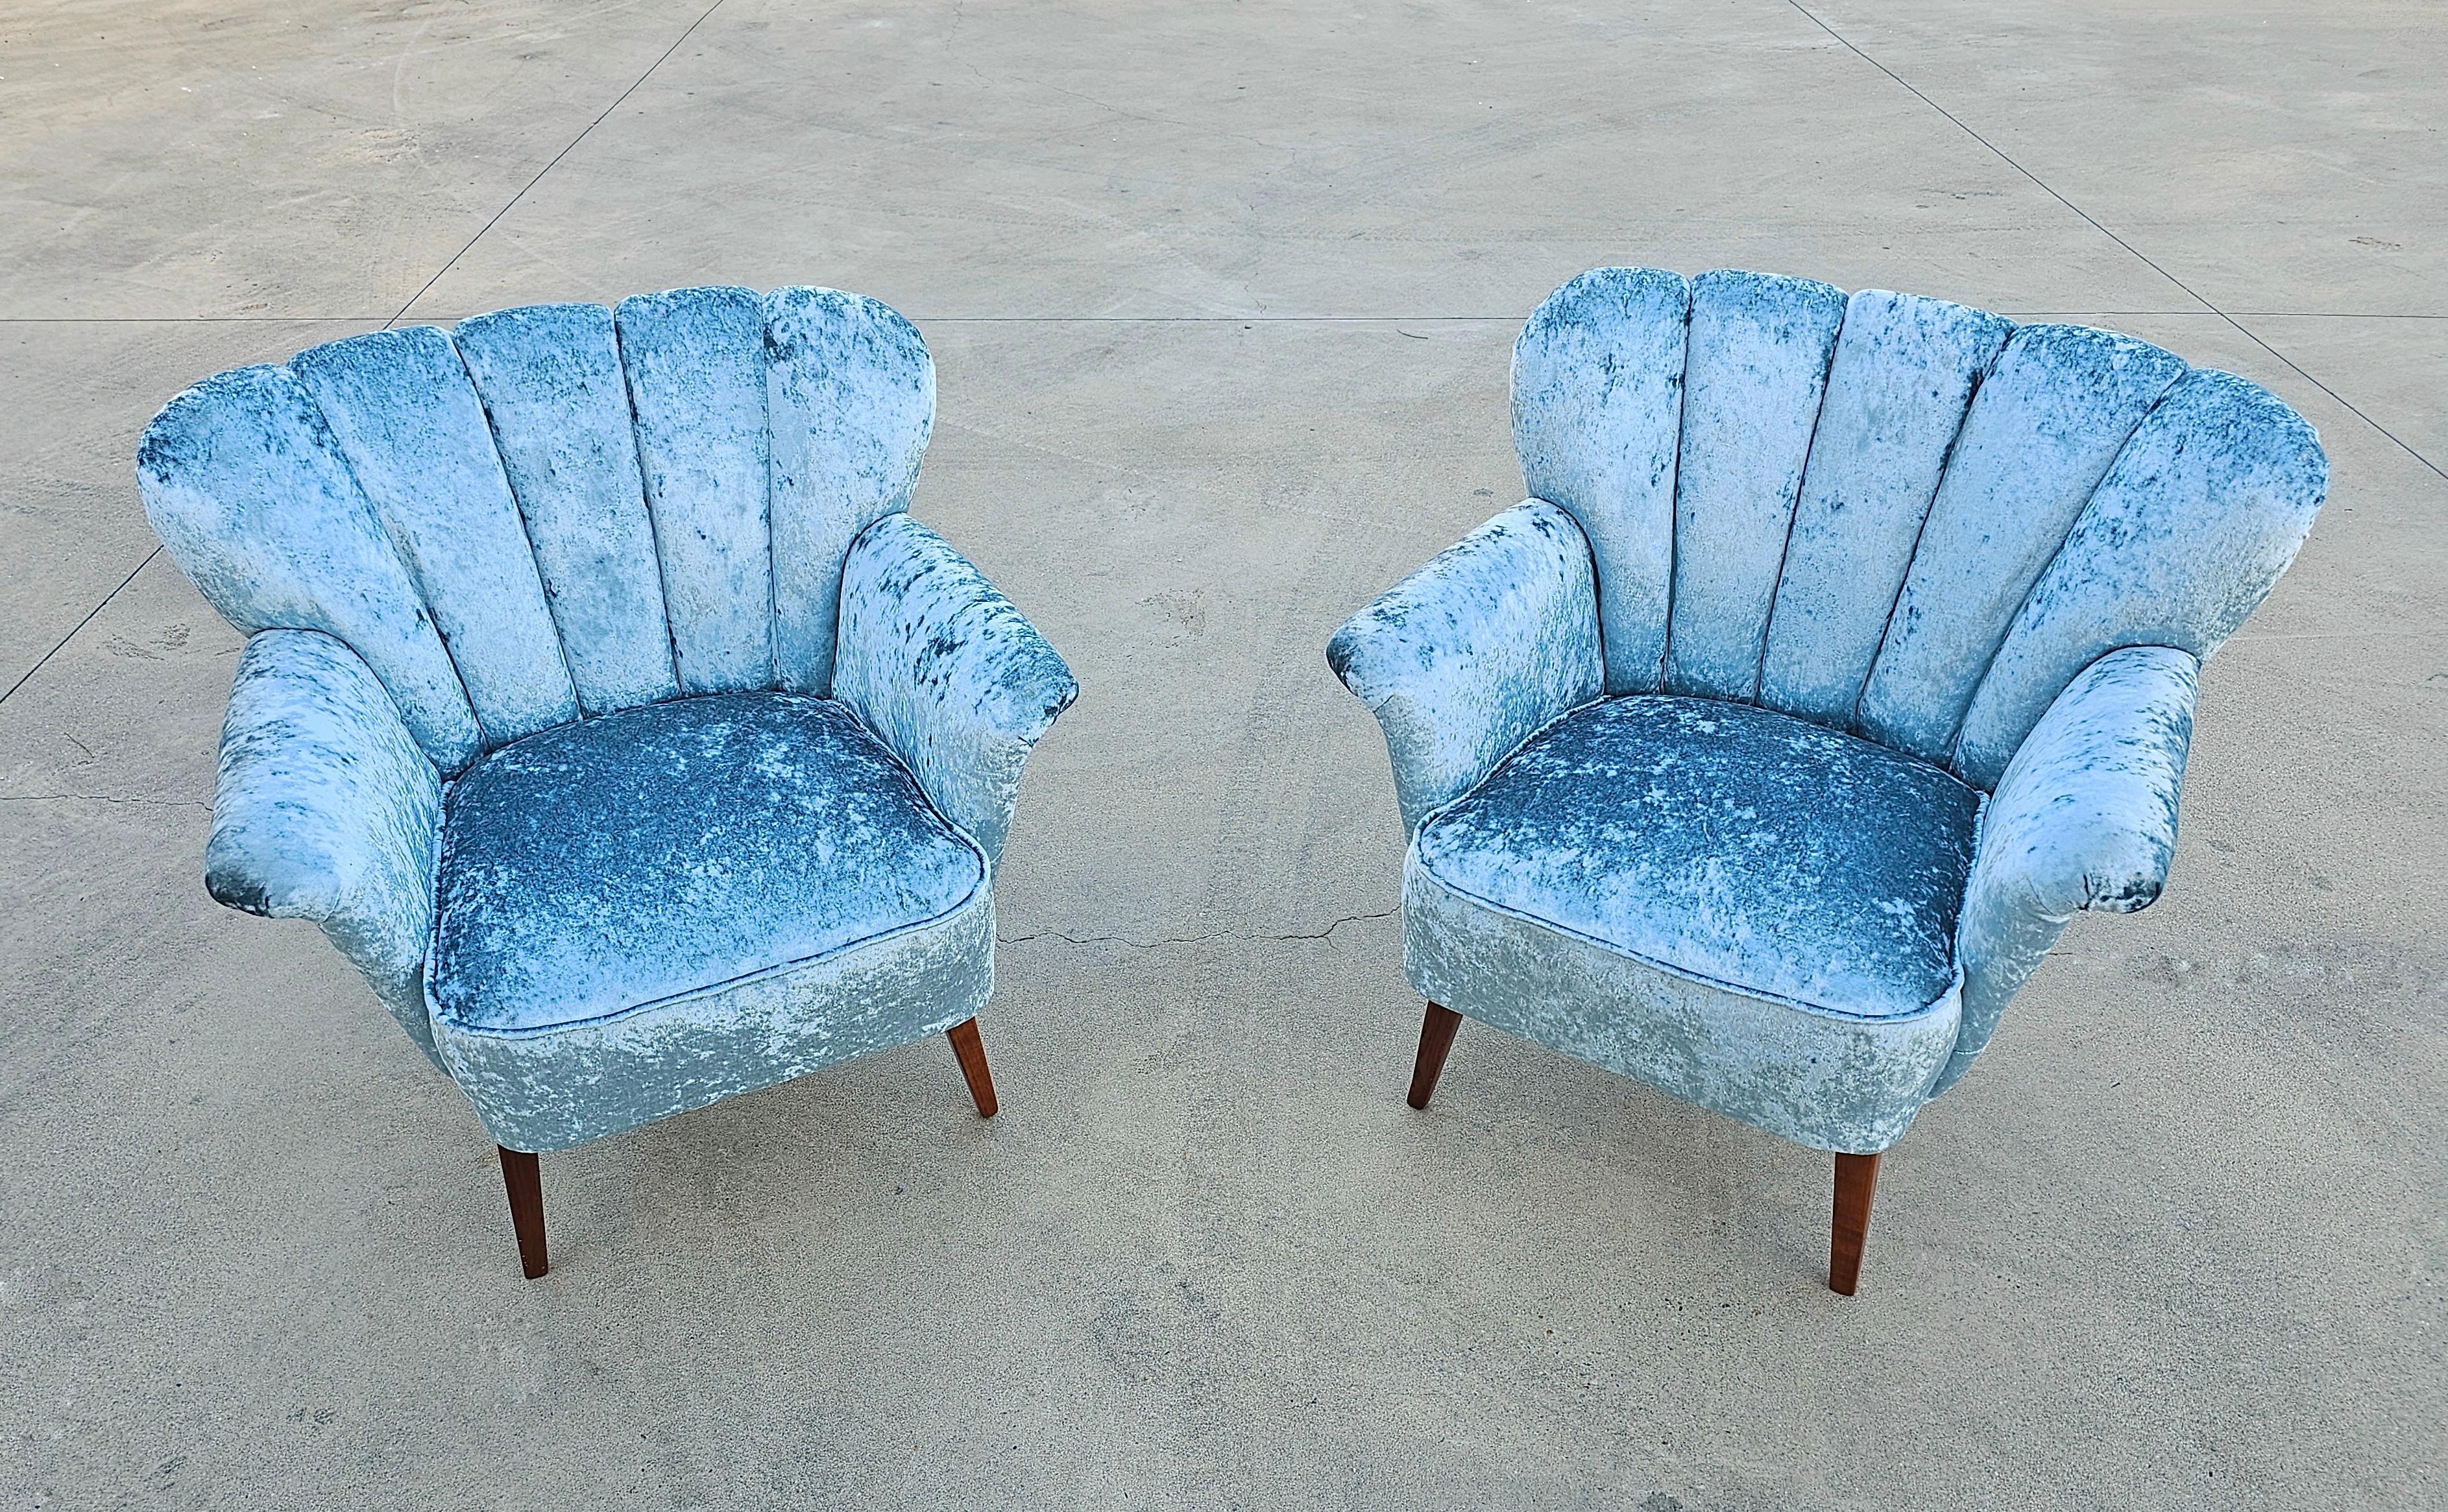 In this listing you will find two extraordinary early Mid Century Modern club or lounge chairs with curved backrest. They feature spectacular design and are extremely comfortable. Made in Denmark in early 1950s.

The chairs have been fully